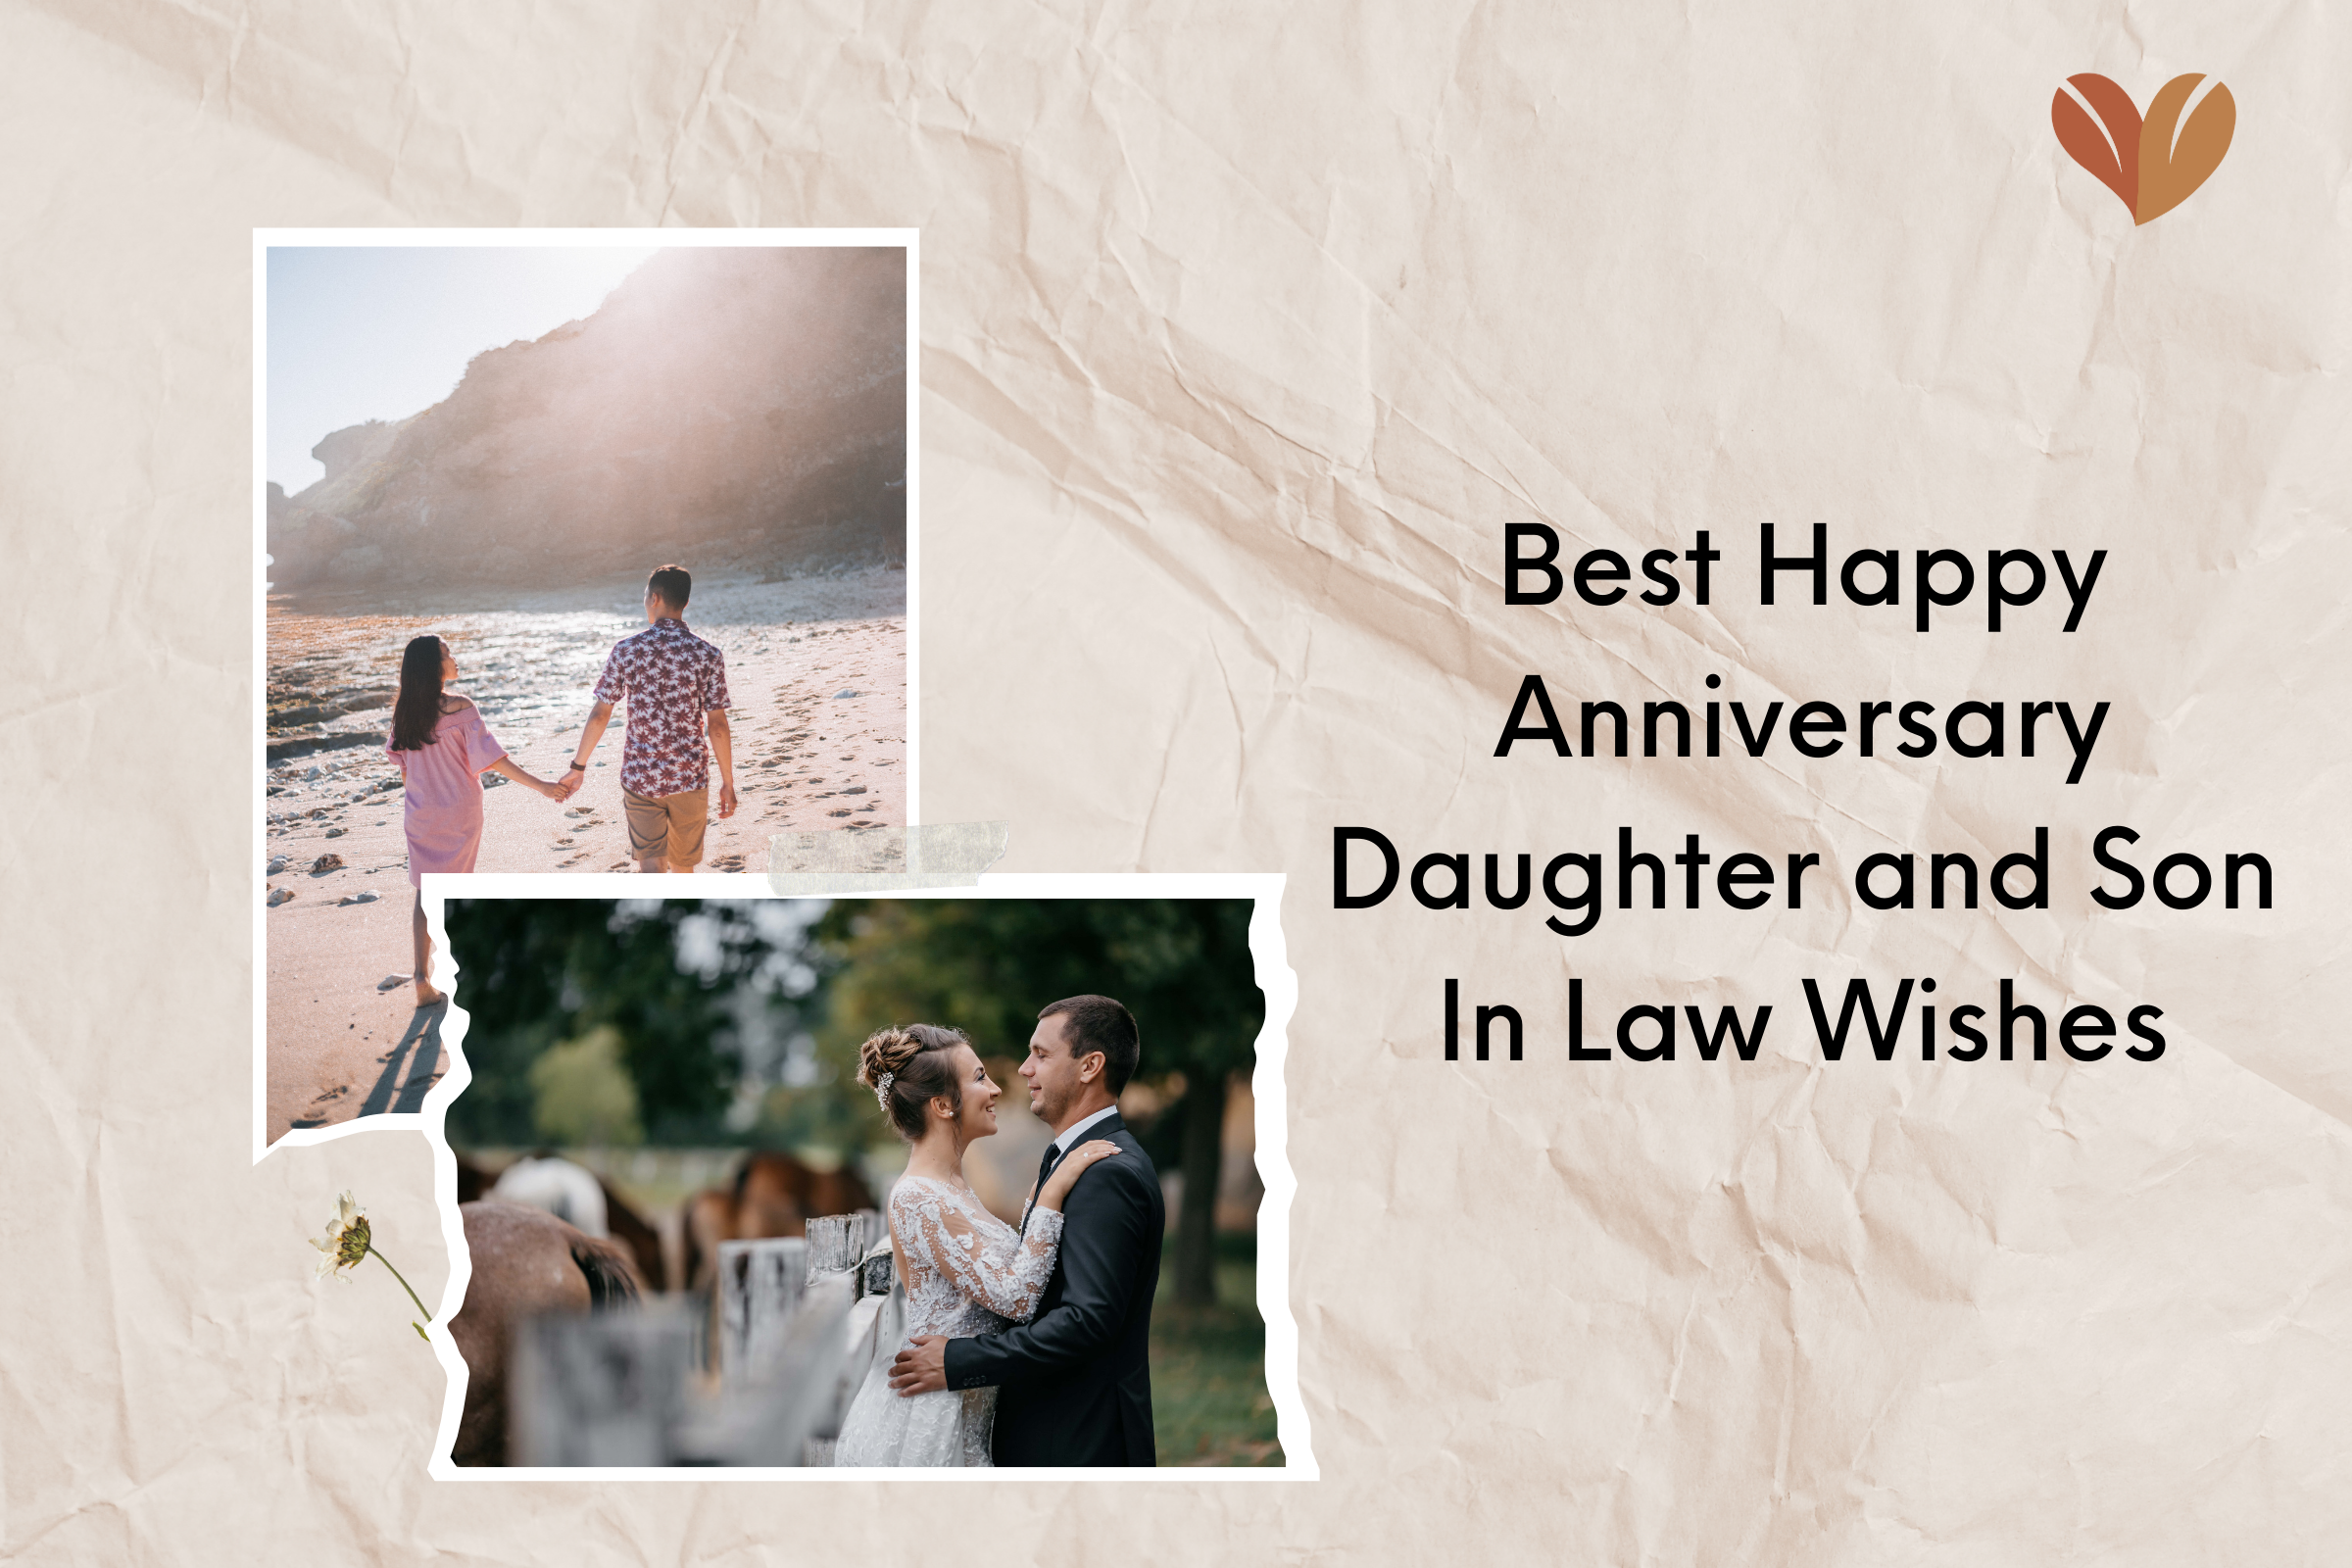 A heartwarming moment captured as they celebrate their happy anniversary daughter and son in law.